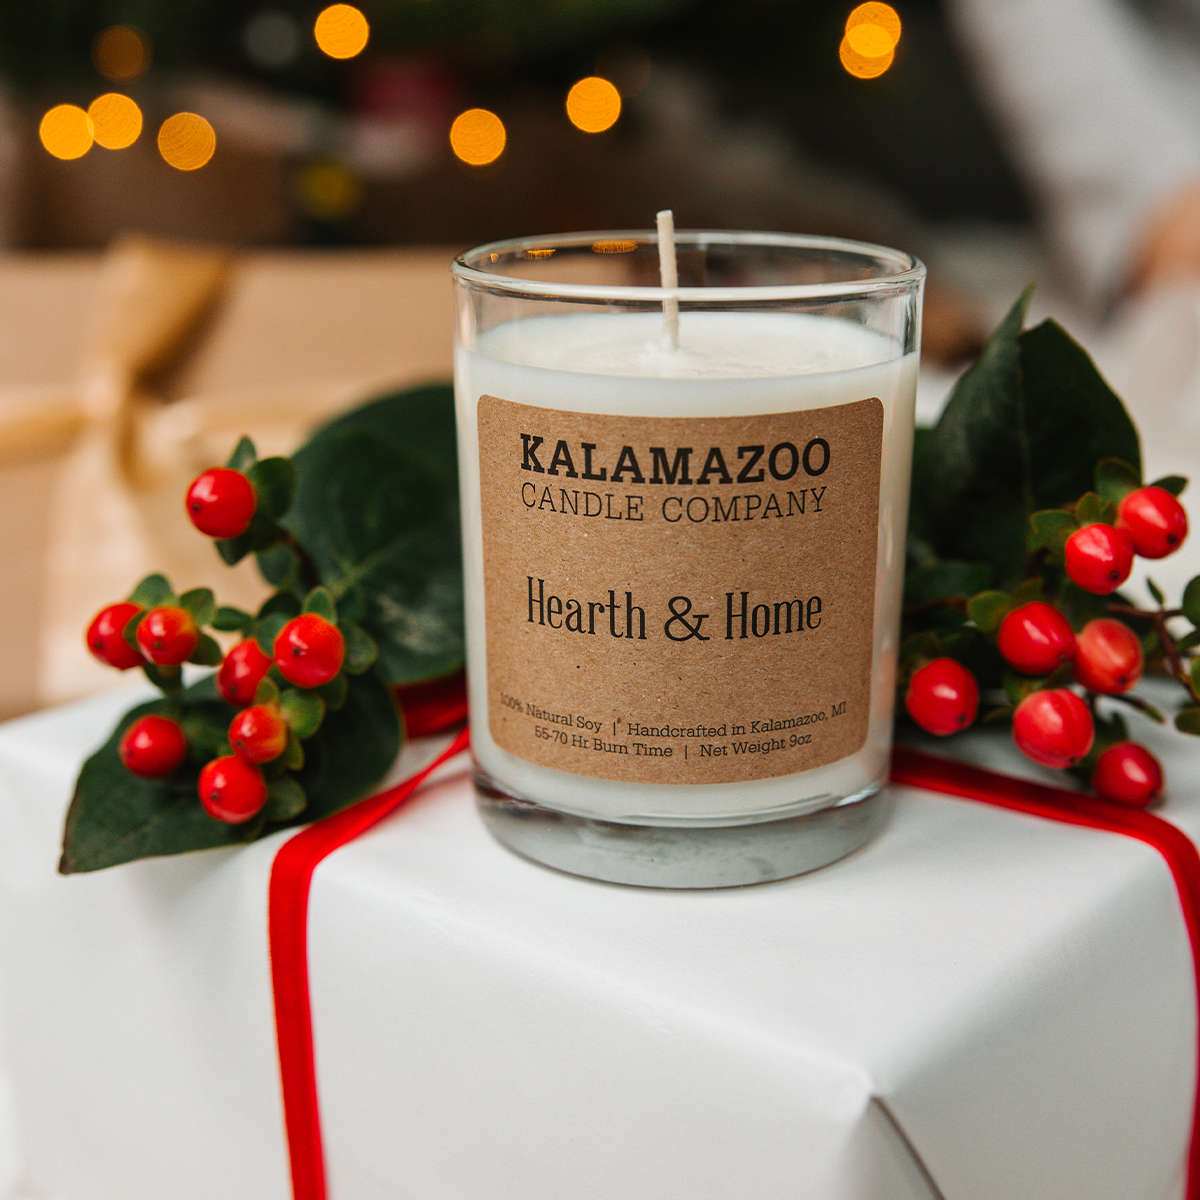 A Hearth & Home Candle on a box